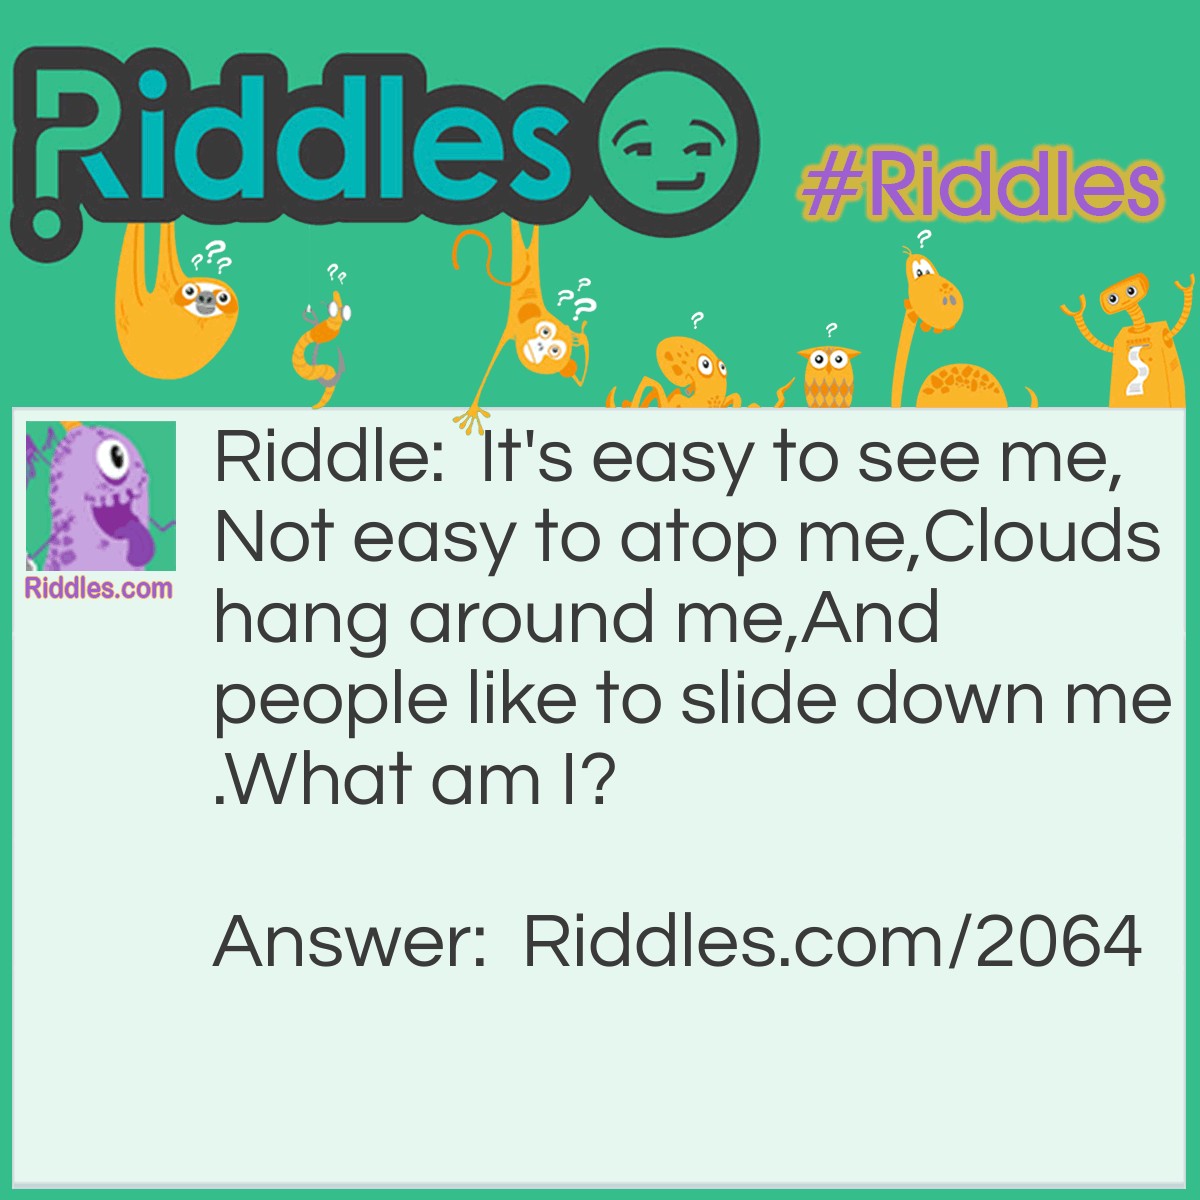 Riddle: It's easy to see me,
Not easy to atop me,
Clouds hang around me,
And people like to slide down me.
What am I? Answer: A mountain.